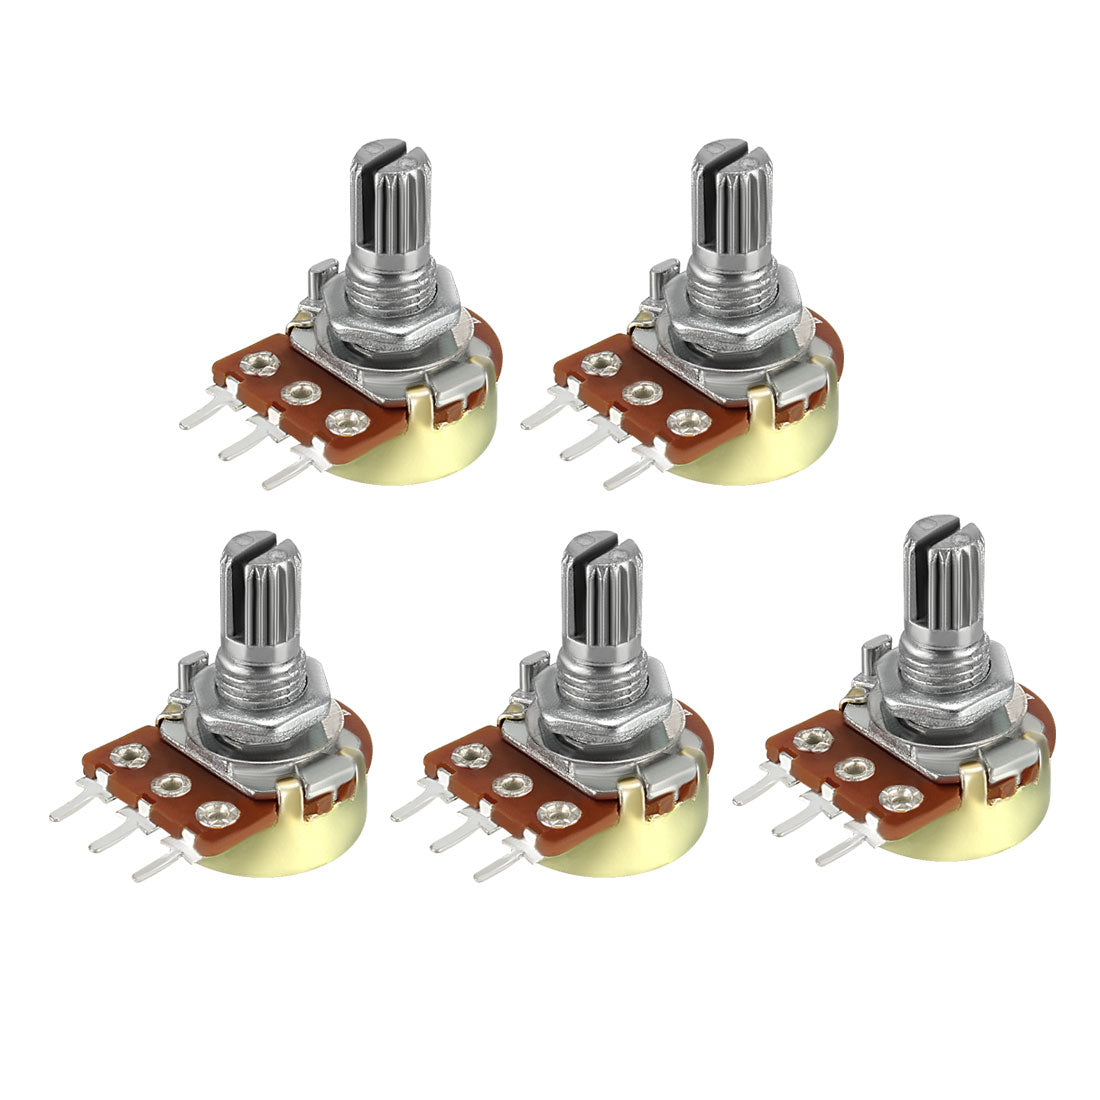 uxcell Uxcell WH148 50K Ohm Variable Resistors Single Turn Rotary Carbon Film Taper Potentiometer 5pcs